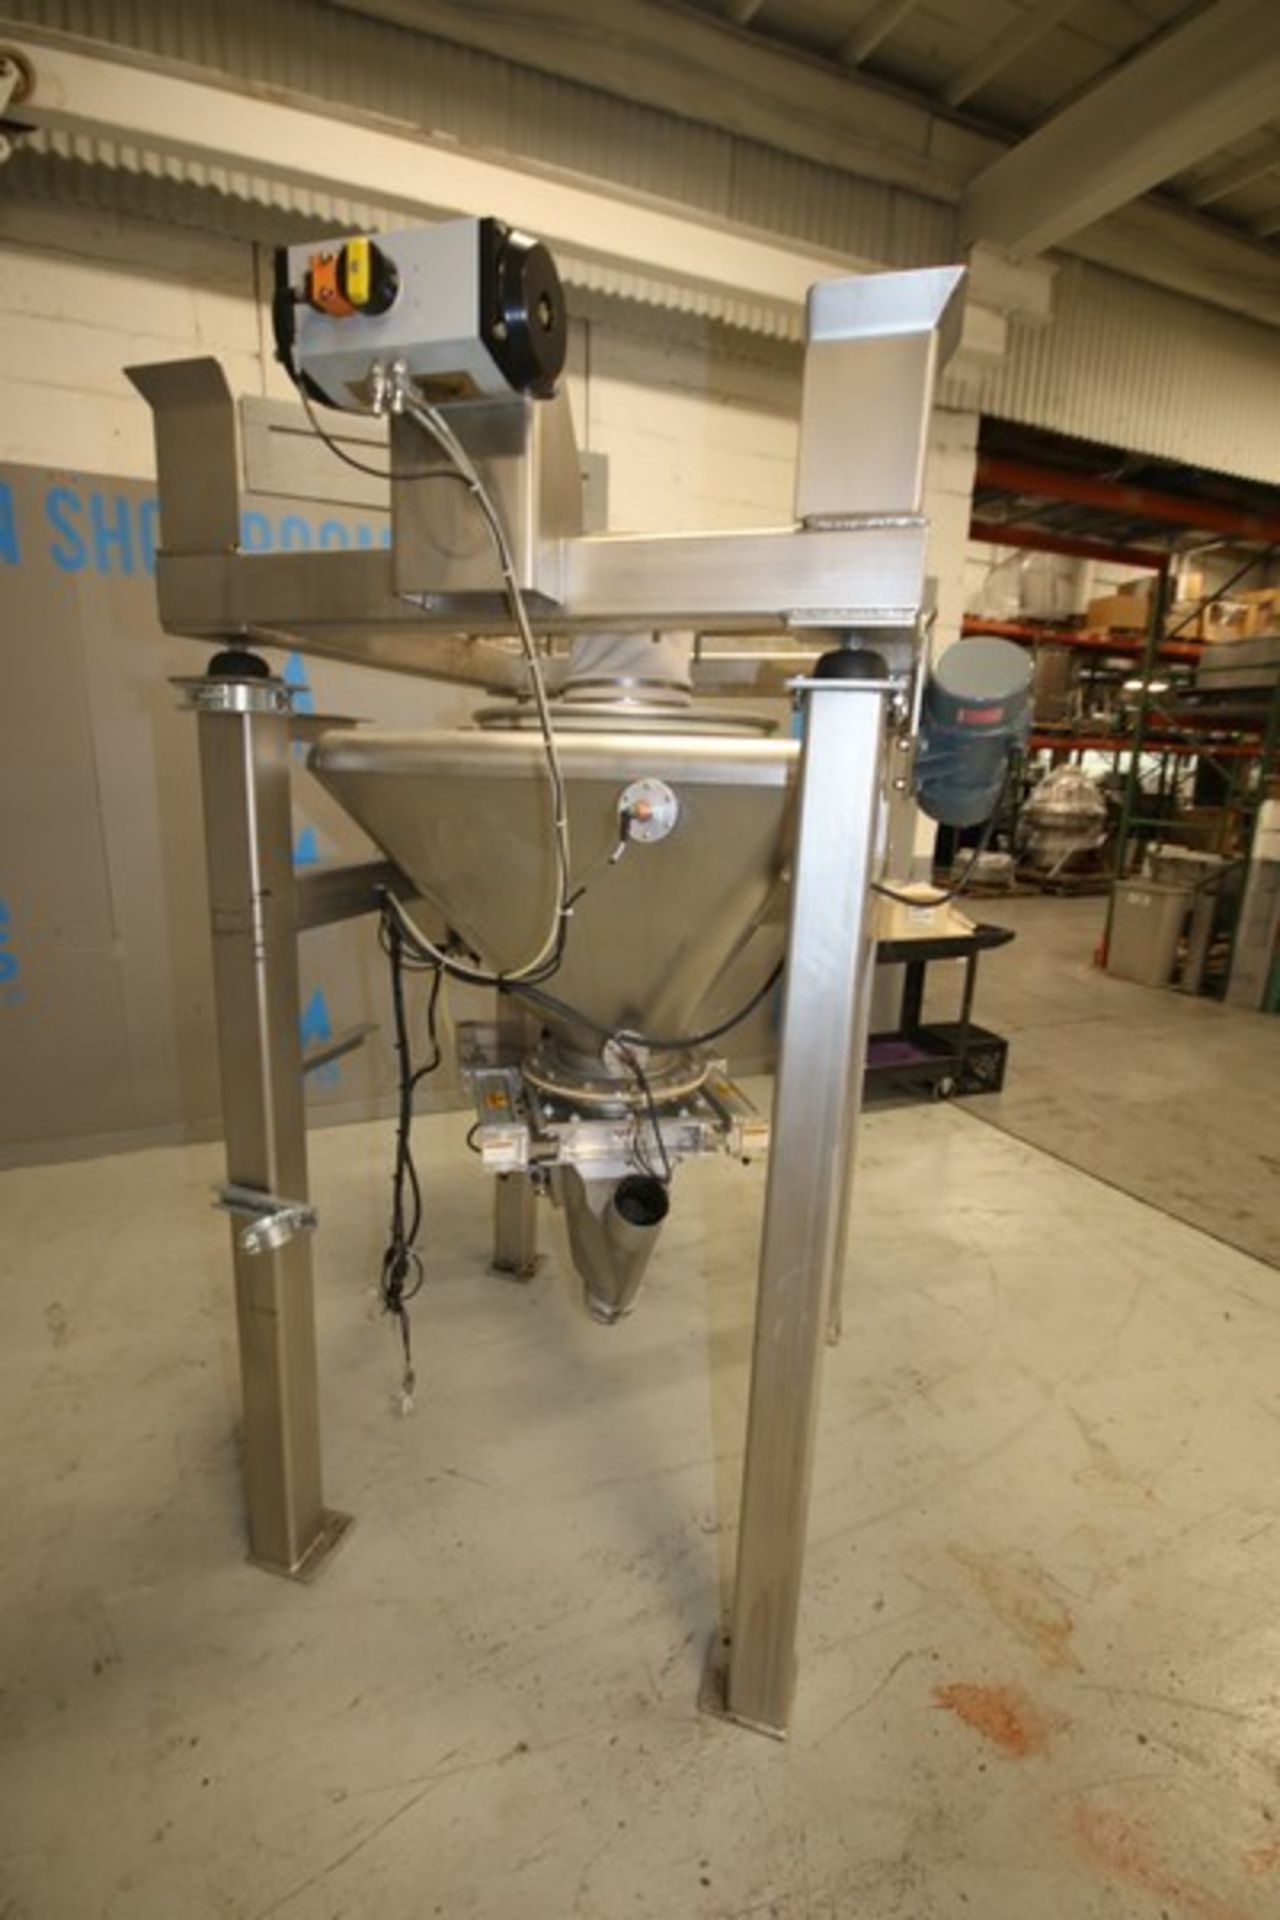 Metalcraft S/S Powder Hopper, Model 1144500,SN 44115-3, with 10" Top Connection with Pneumatic Power - Image 2 of 7